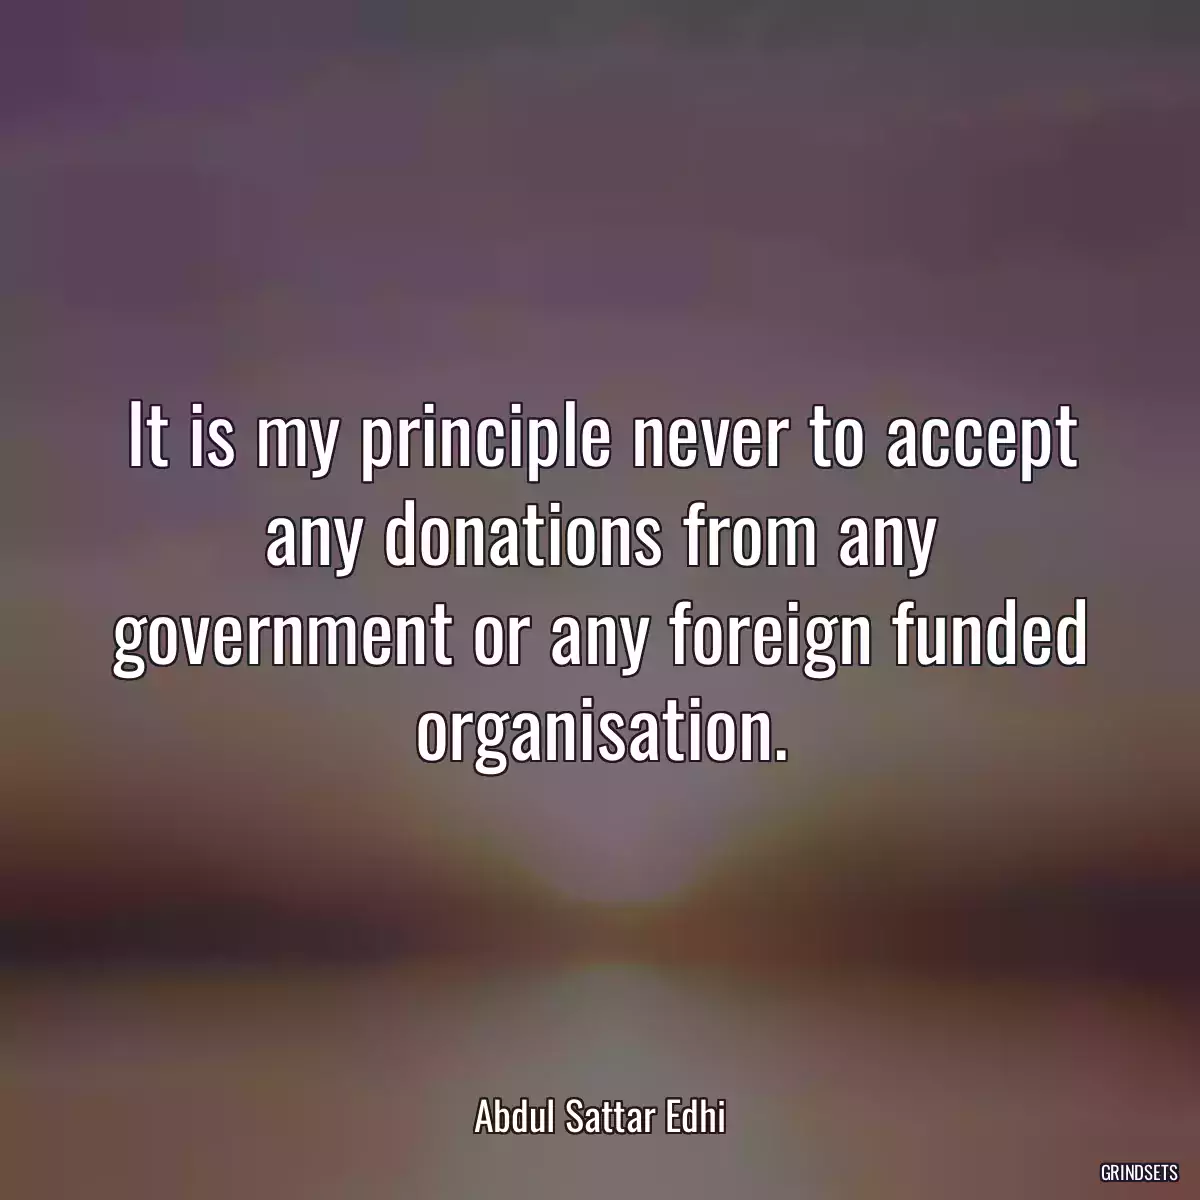 It is my principle never to accept any donations from any government or any foreign funded organisation.